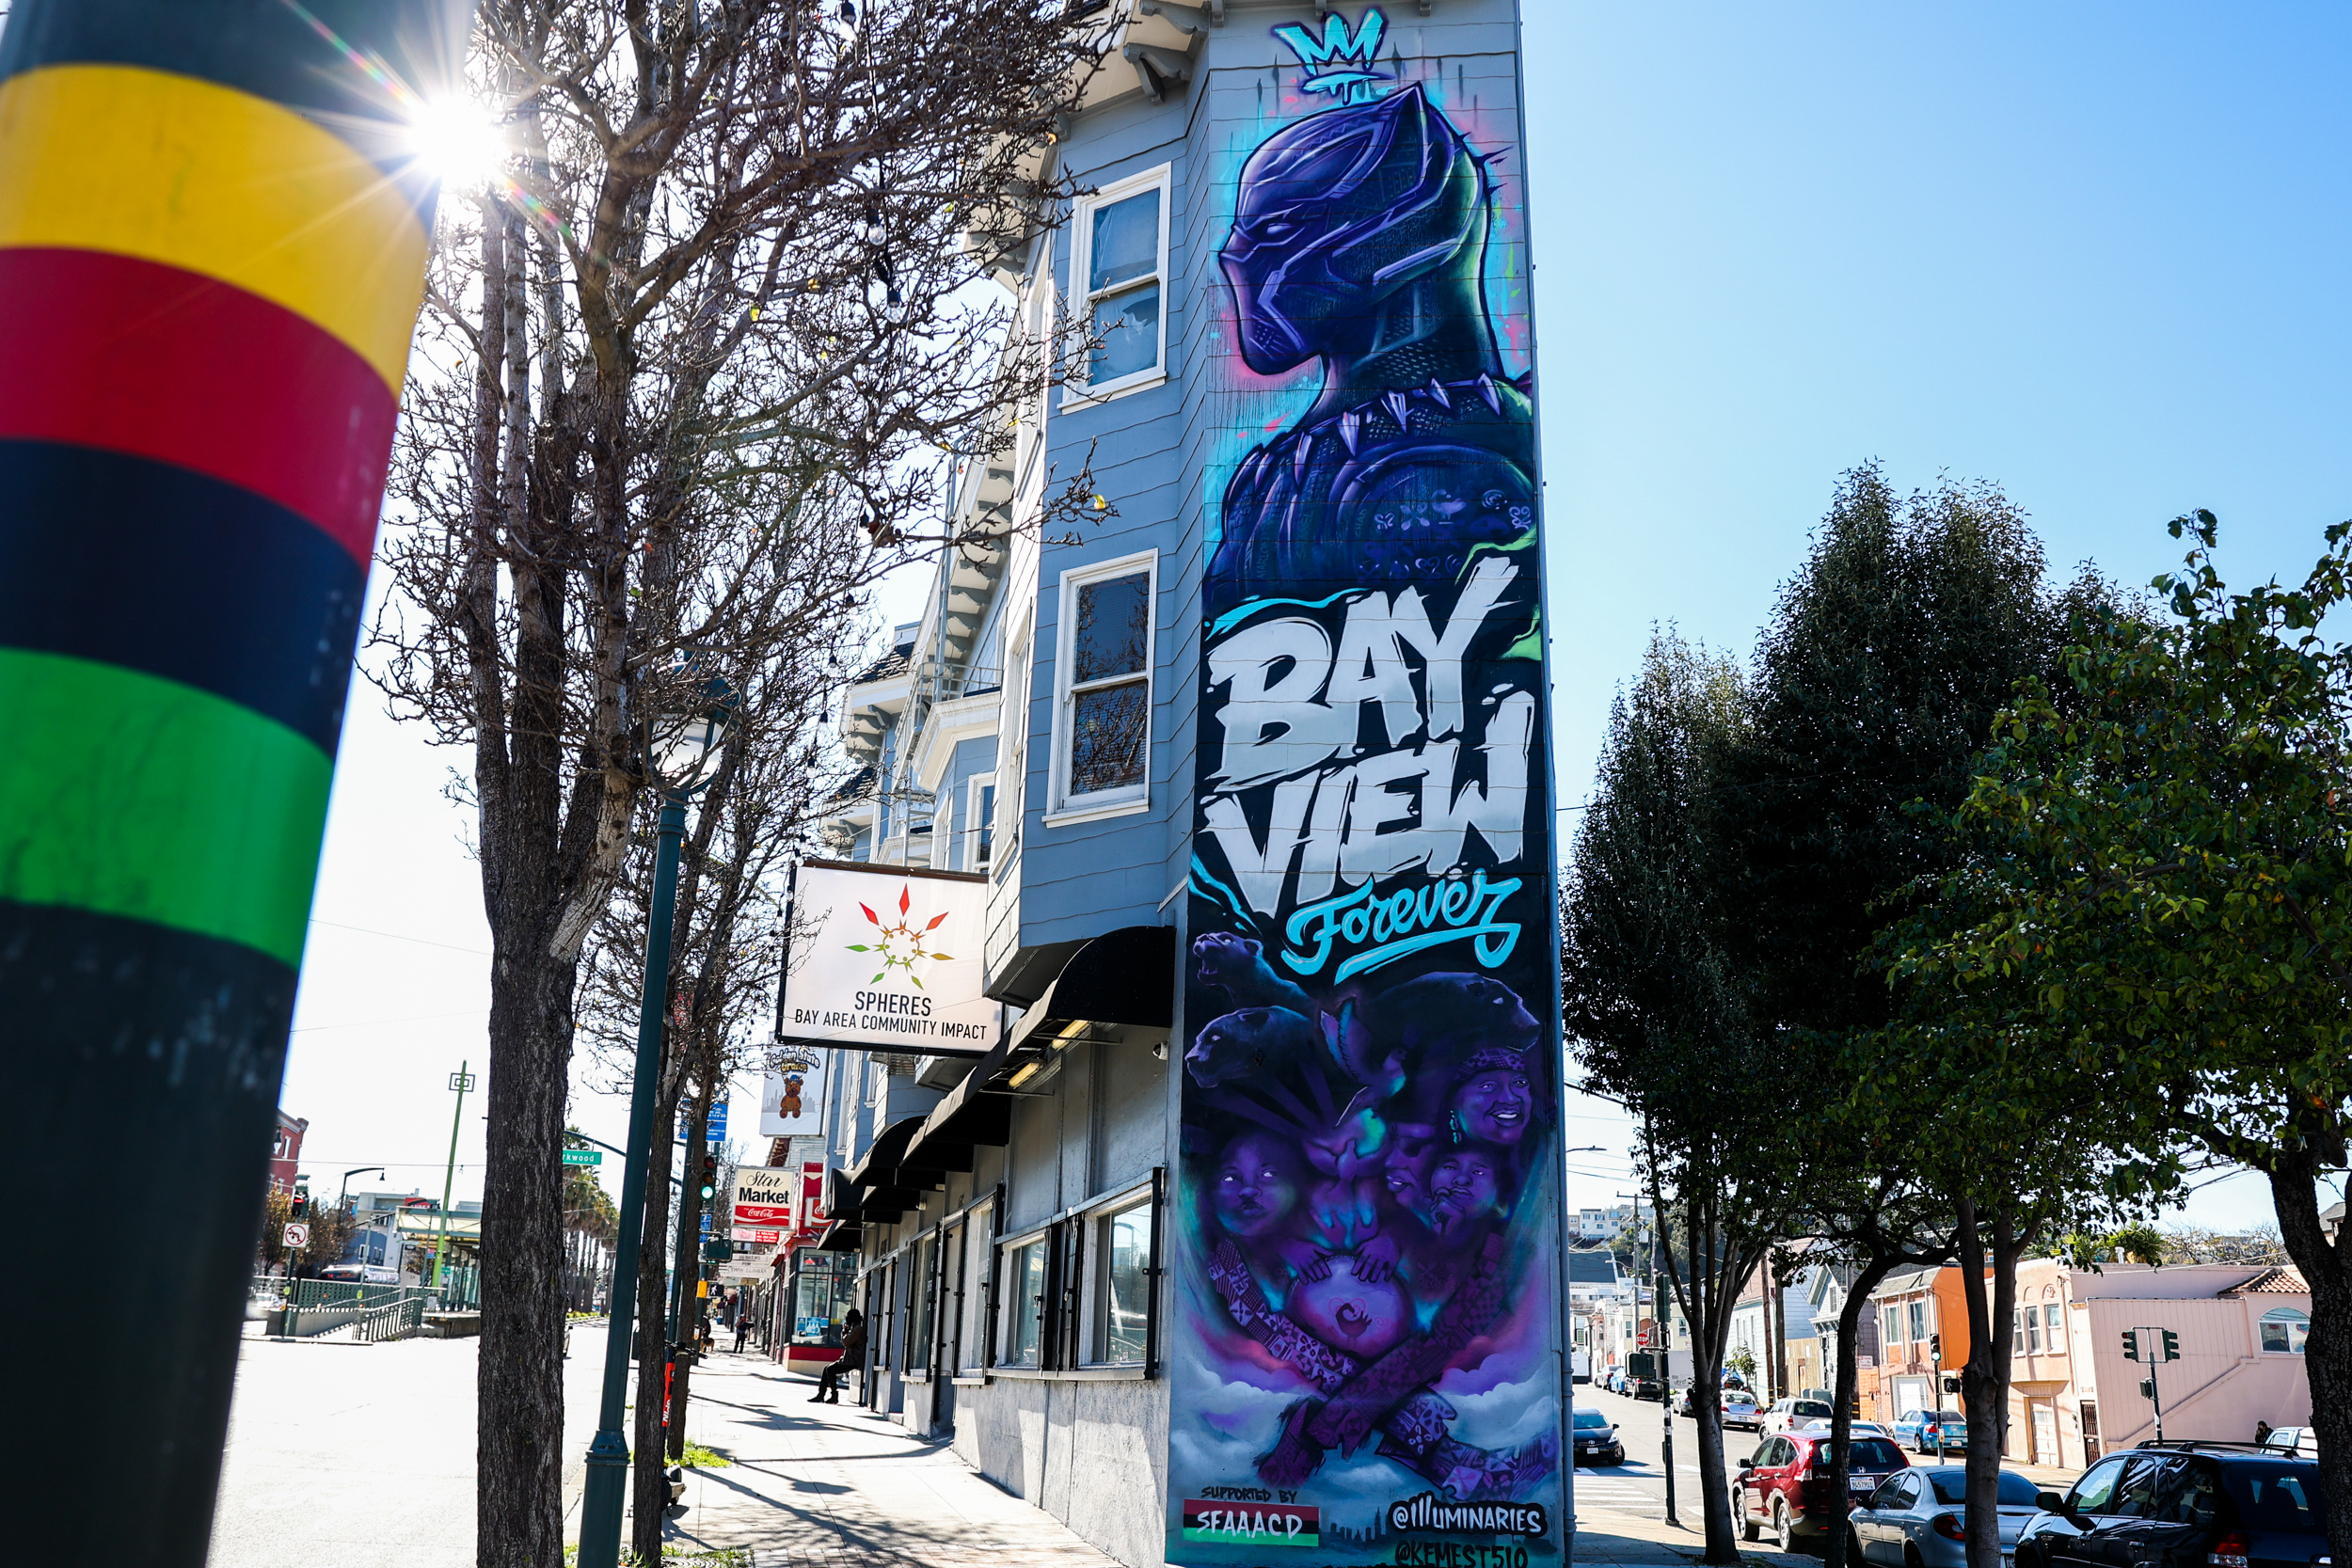 A colorful mural that reads Bay View Forever with a likeness of Black Panther.